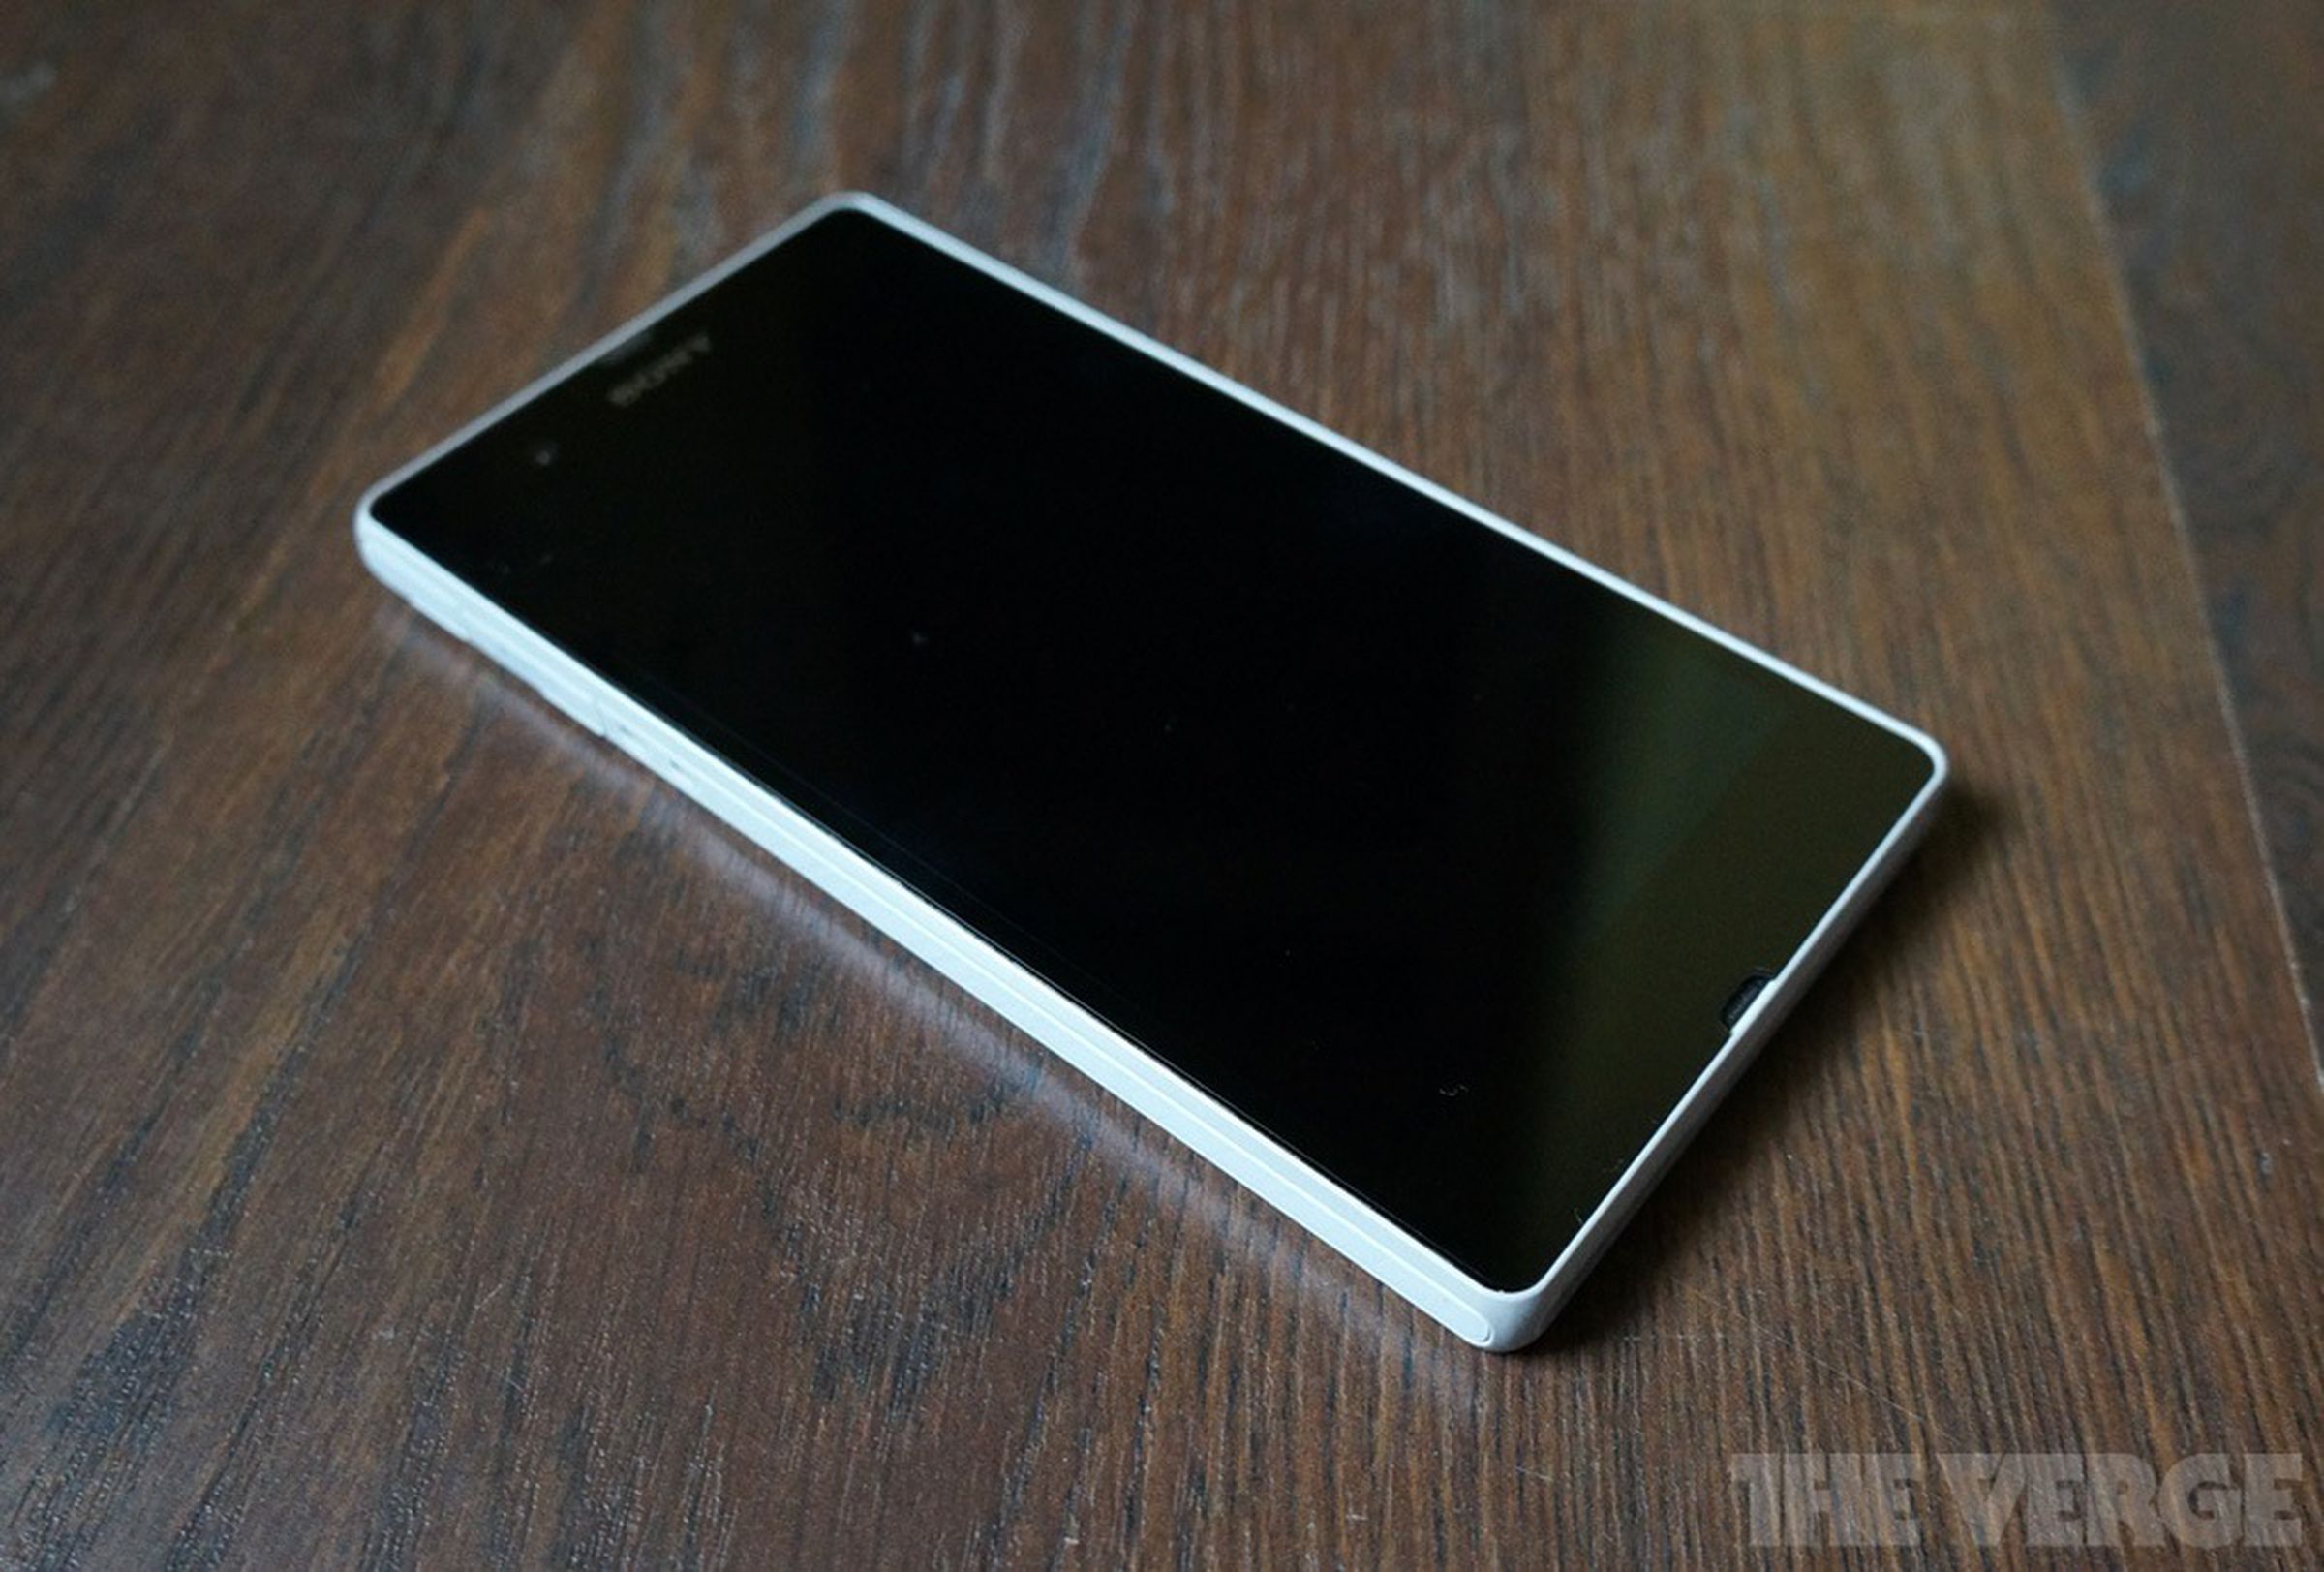 Xperia Z review gallery